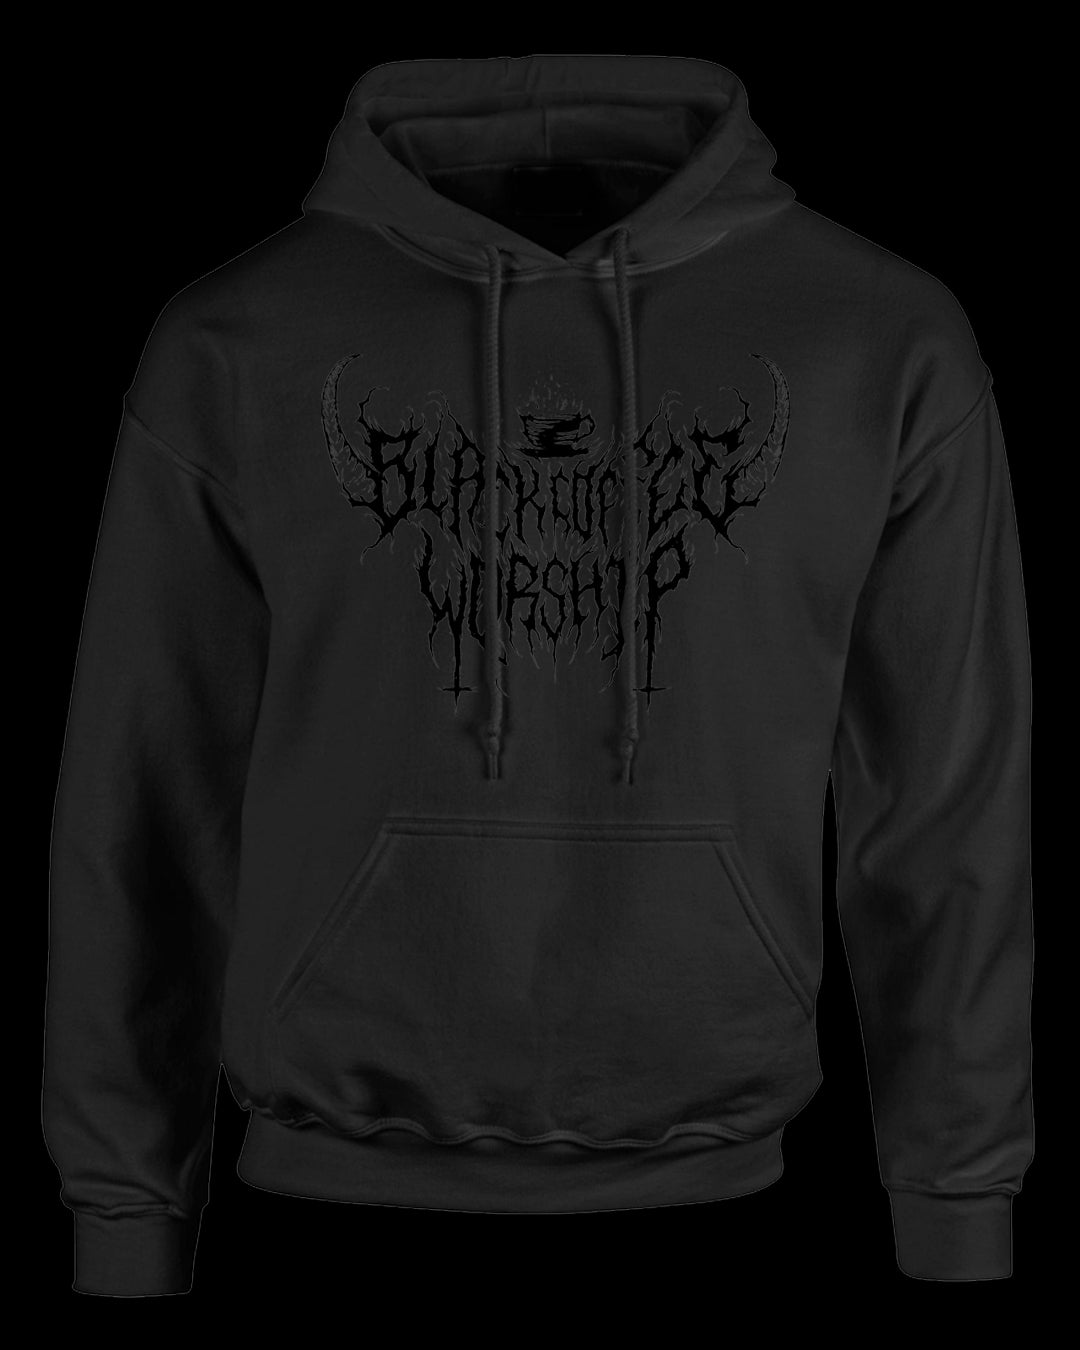 stealth unholy black coffee worship text pullover hoodie (black on black)